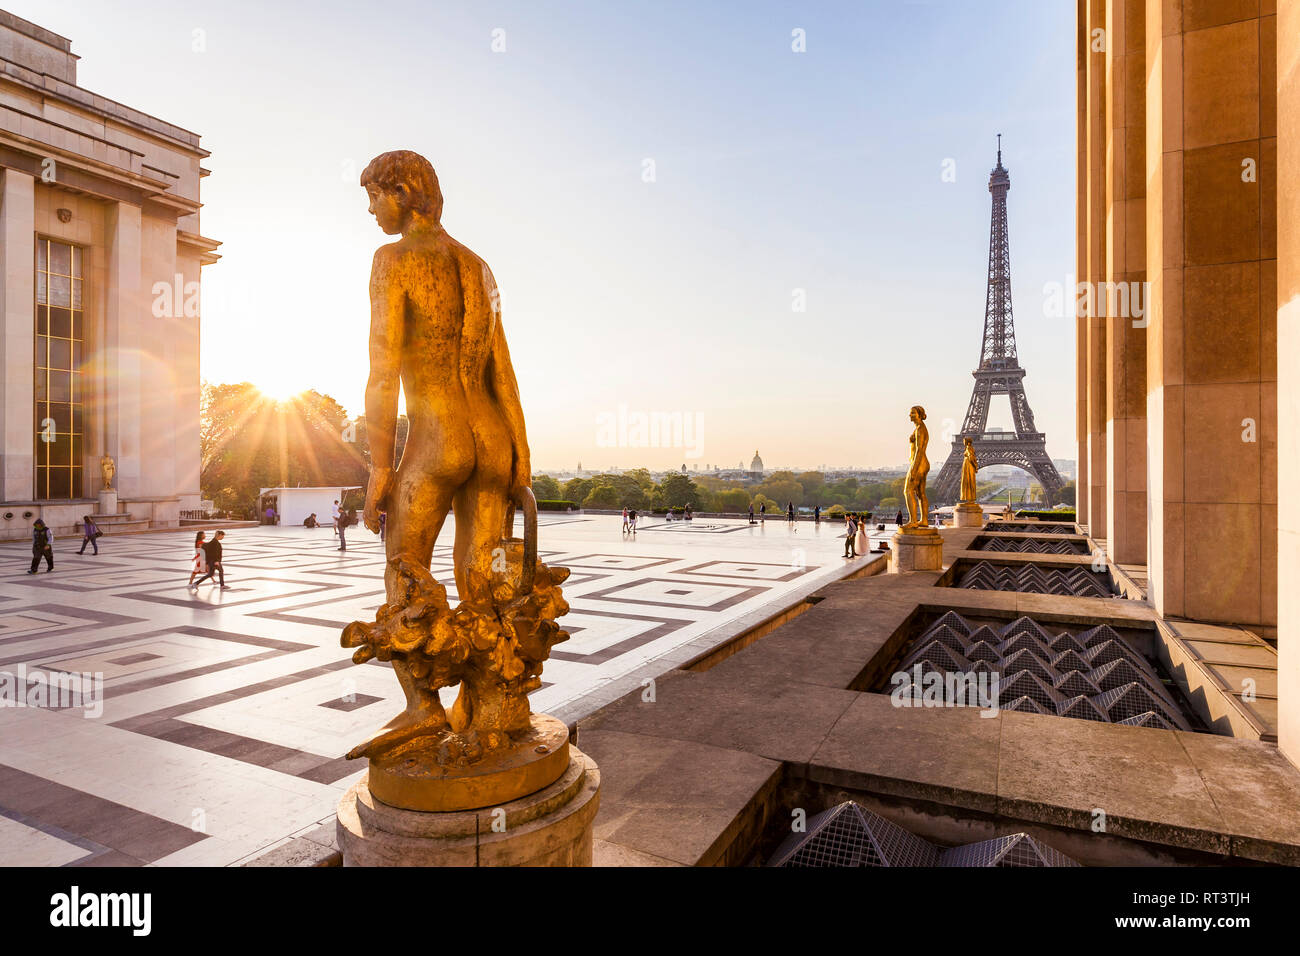 France, Paris, Eiffel Tower with statues at Place du Trocadero Stock Photo